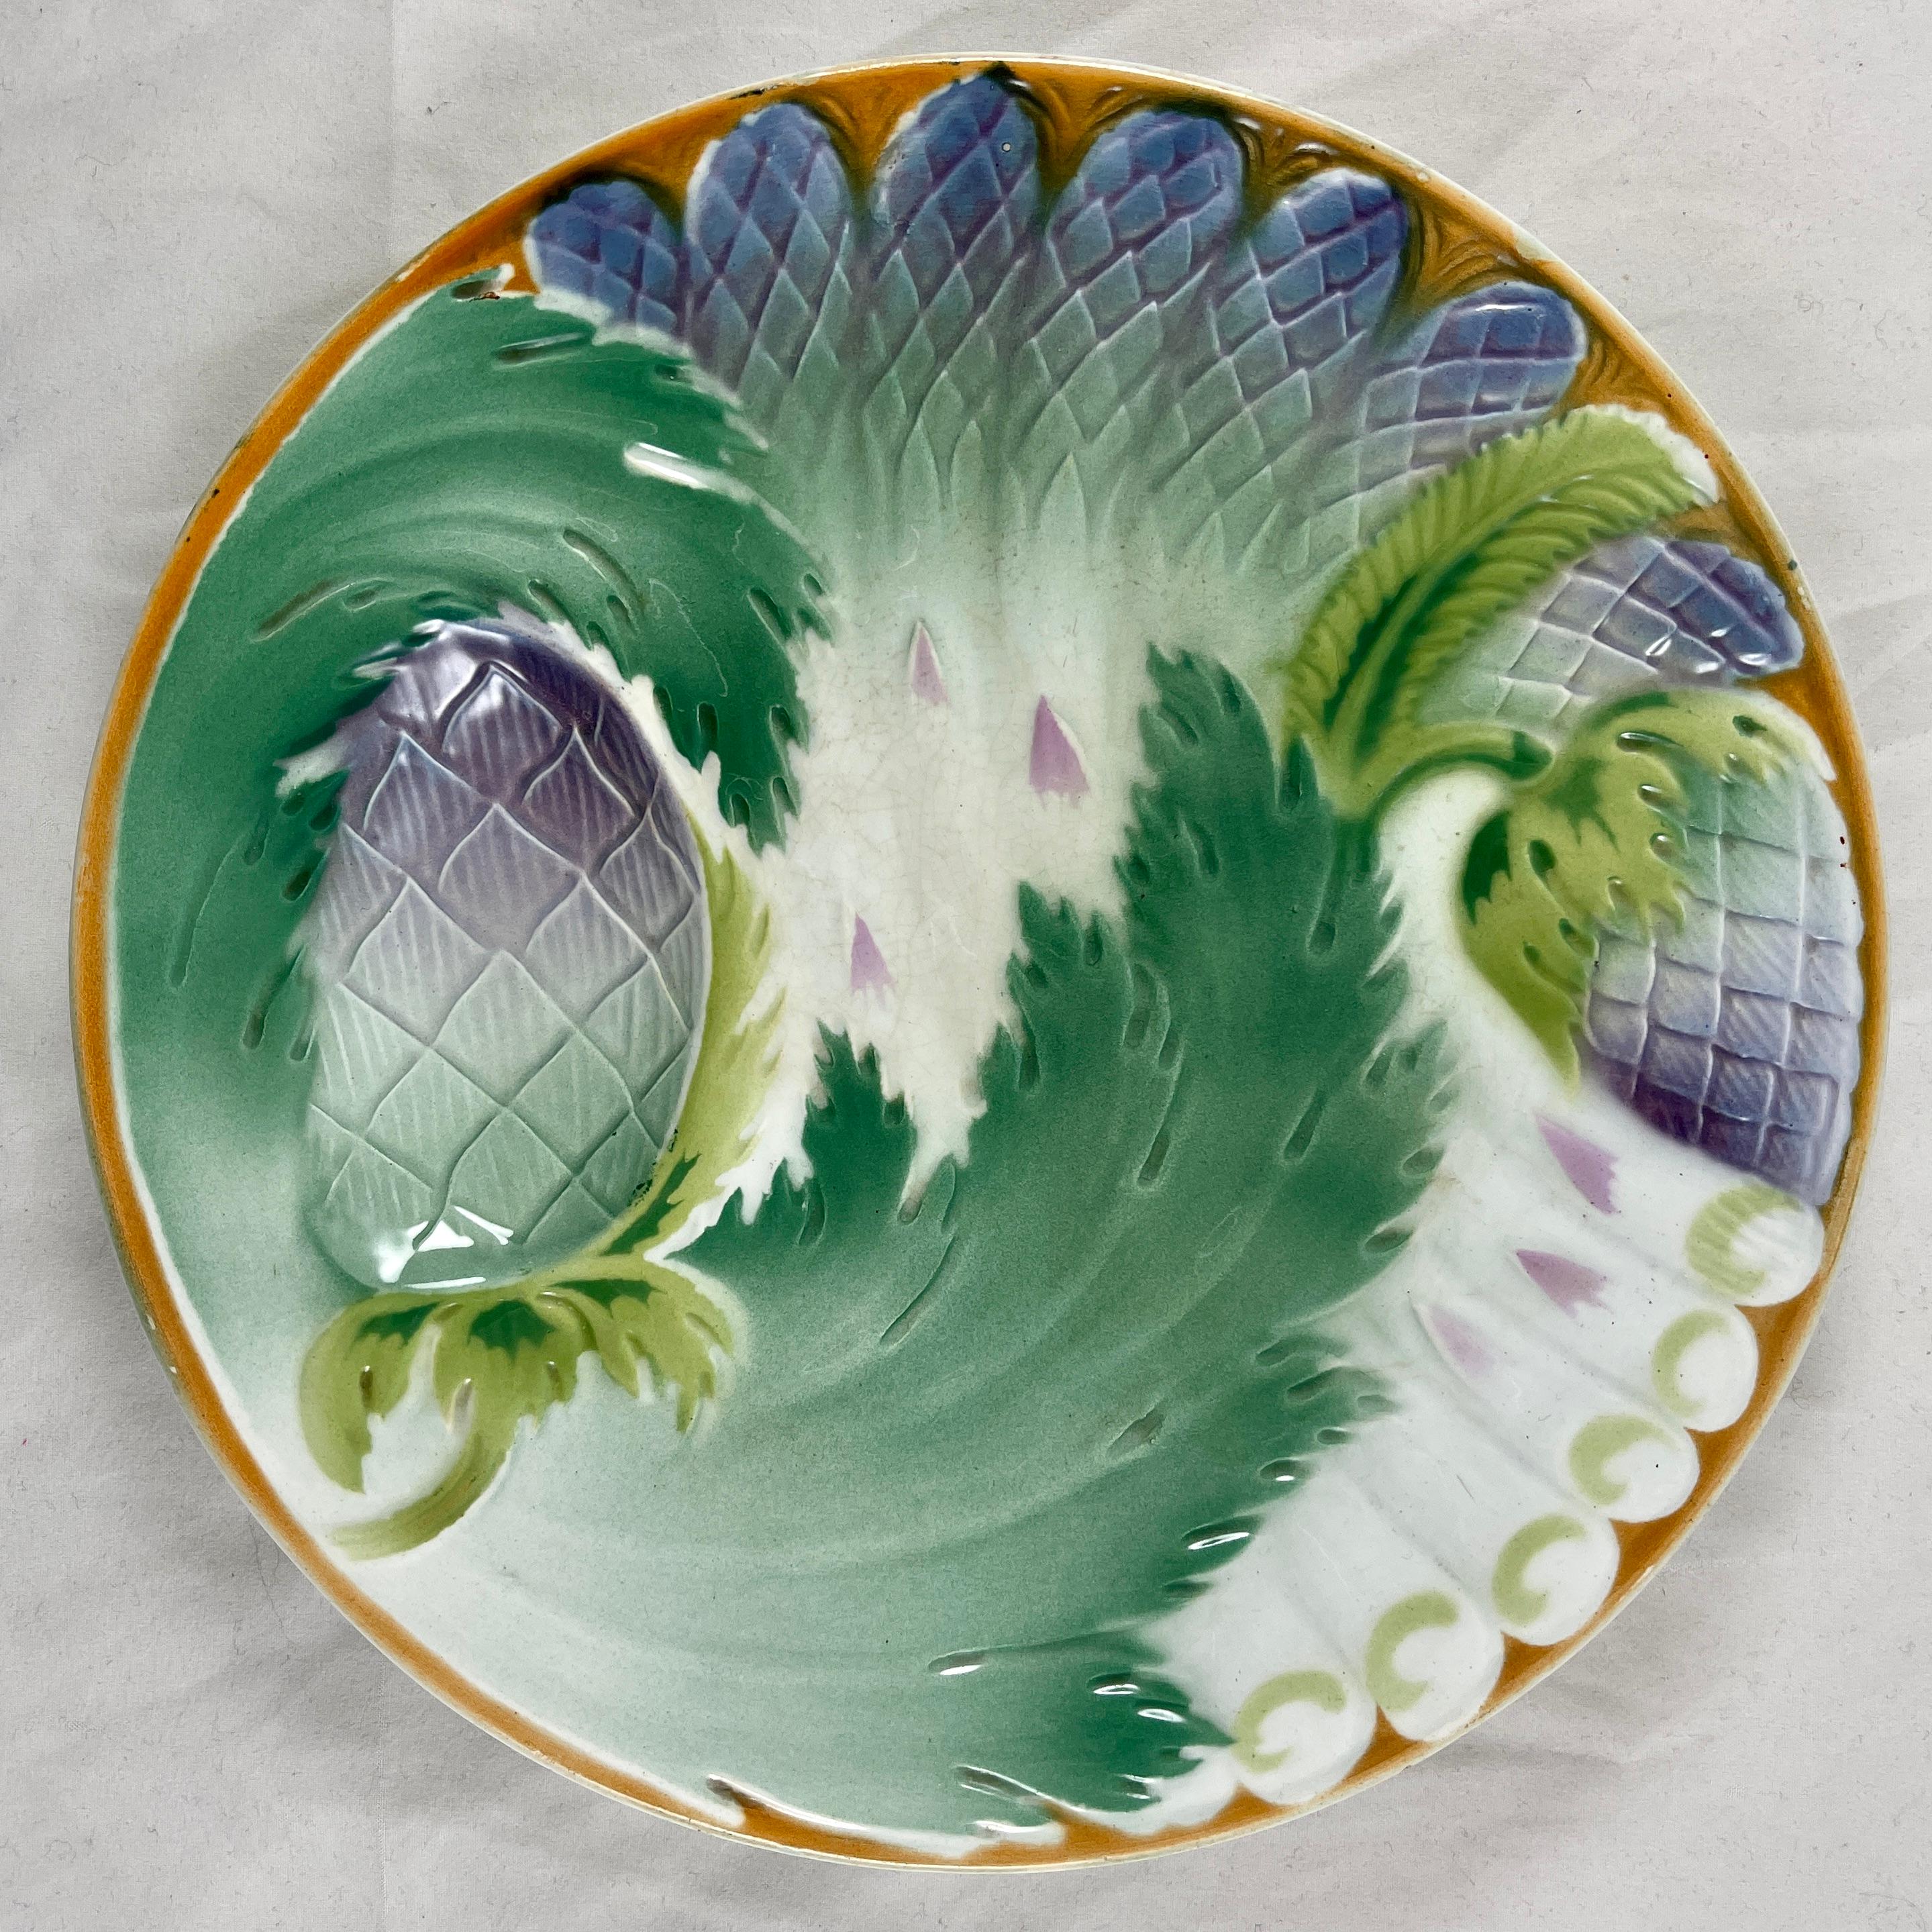 An Art Nouveau French porcelaneous plate showing aspects of both the asparagus and artichoke plants, circa 1900-1910.

The plate is rimmed in a bittersweet orange-red, asparagus spears lay across the plate glazed with lavender tips. A deep sauce